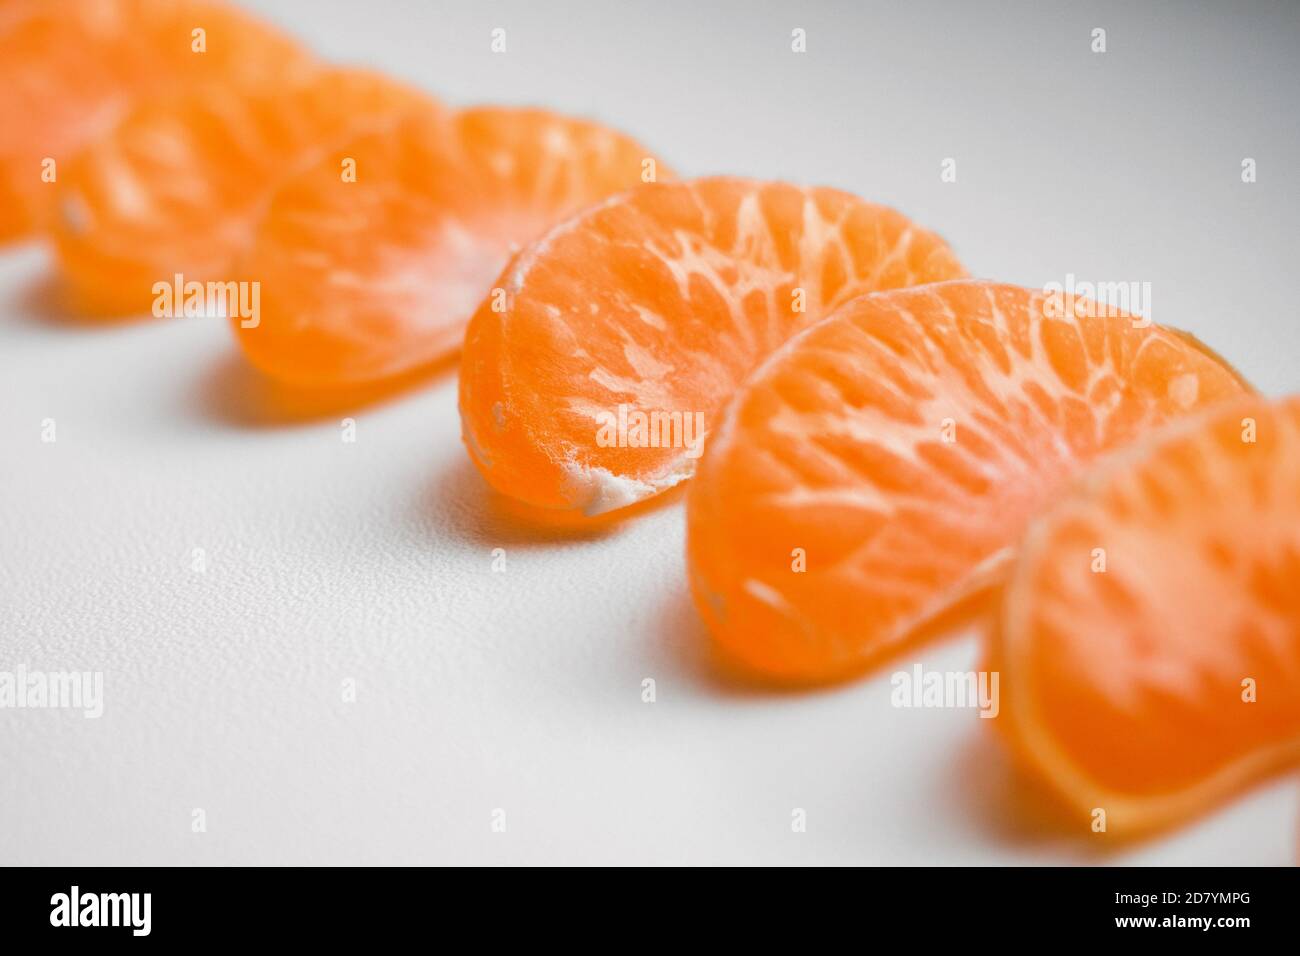 Slice sections of tangerine served on angle over the white background. Selective focus Stock Photo